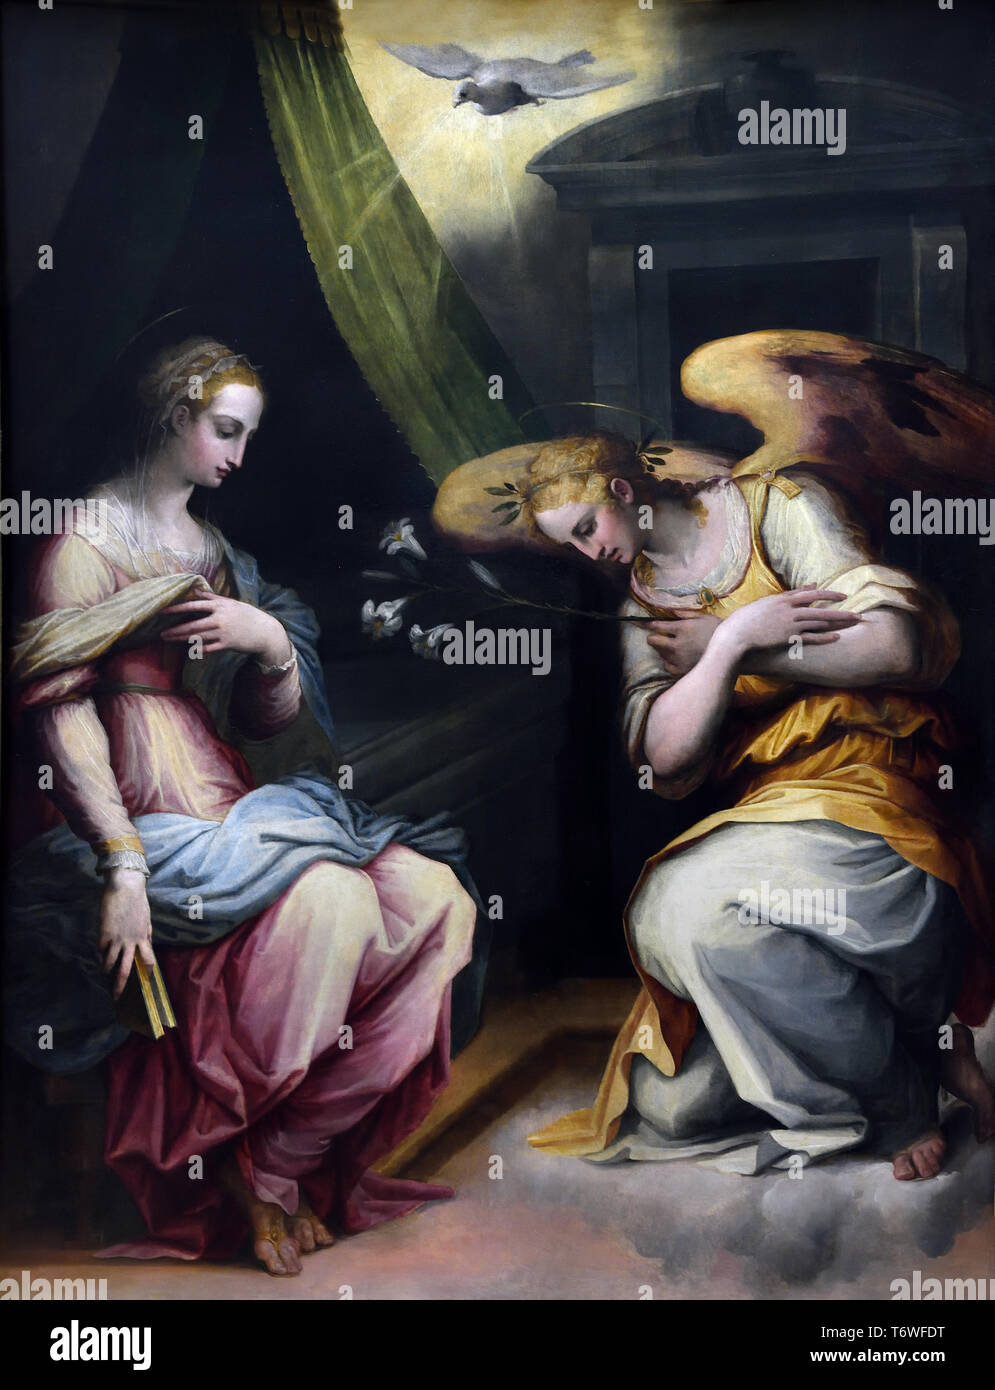 The Annunciation by Giorgio VASARI Arezzo, 1511 – Florence, 1574, Italian, Italy, ( painted in around 1564–67 for the altar of the Dominican church of Santa Maria Novella d'Arezzo ) Annunciation, blessed, Virgin Mary, the announcement by the ,angel Gabriel, Mary that she would conceive, bear a son through a, virgin birth, become the, mother of Jesus Christ, Christian Messiah and Son of God, Incarnation, Stock Photo